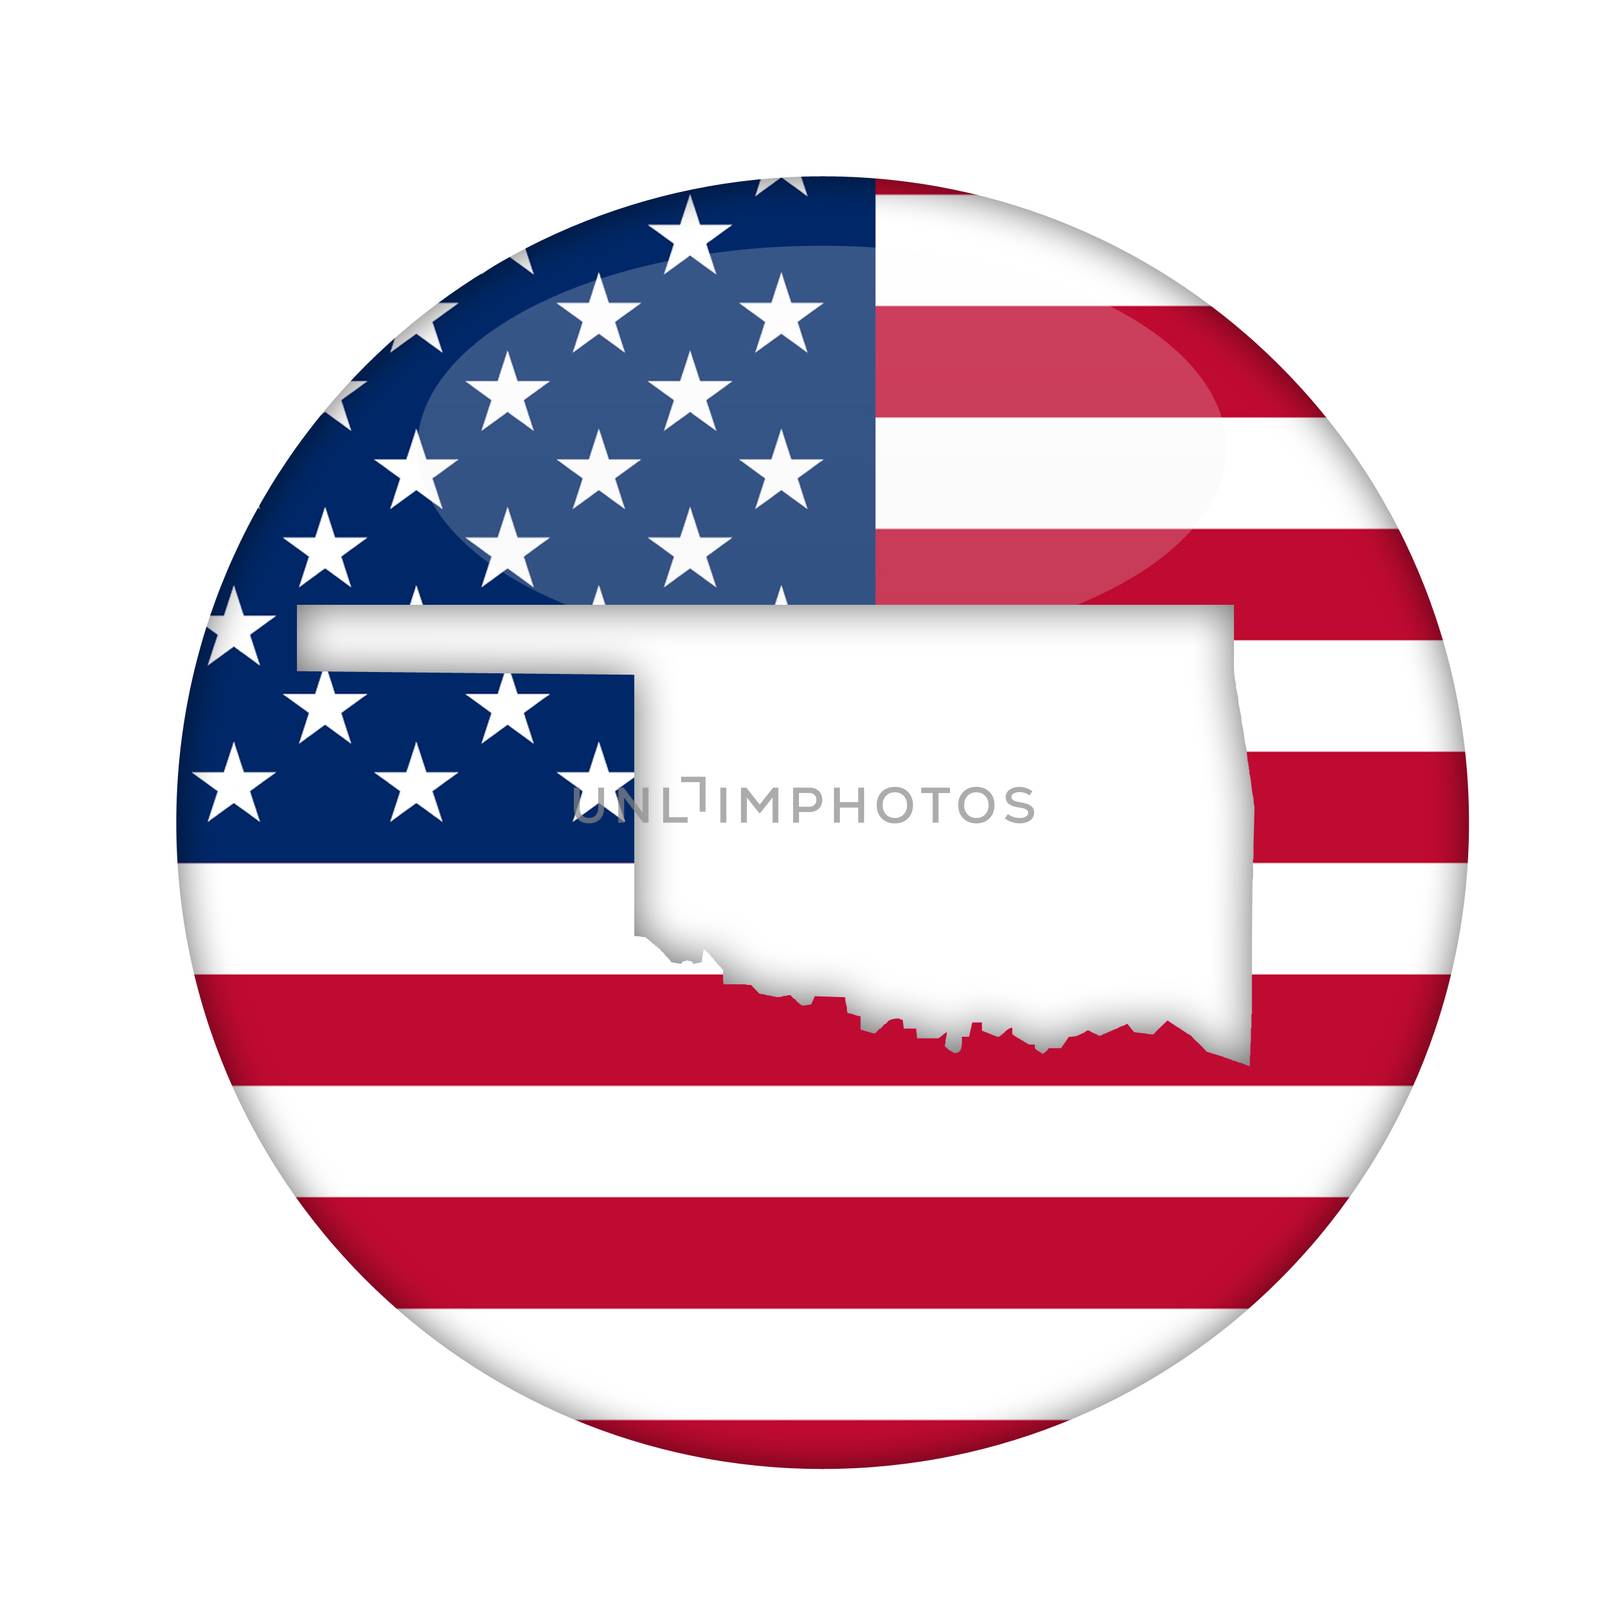 Oklahoma state of America badge isolated on a white background.